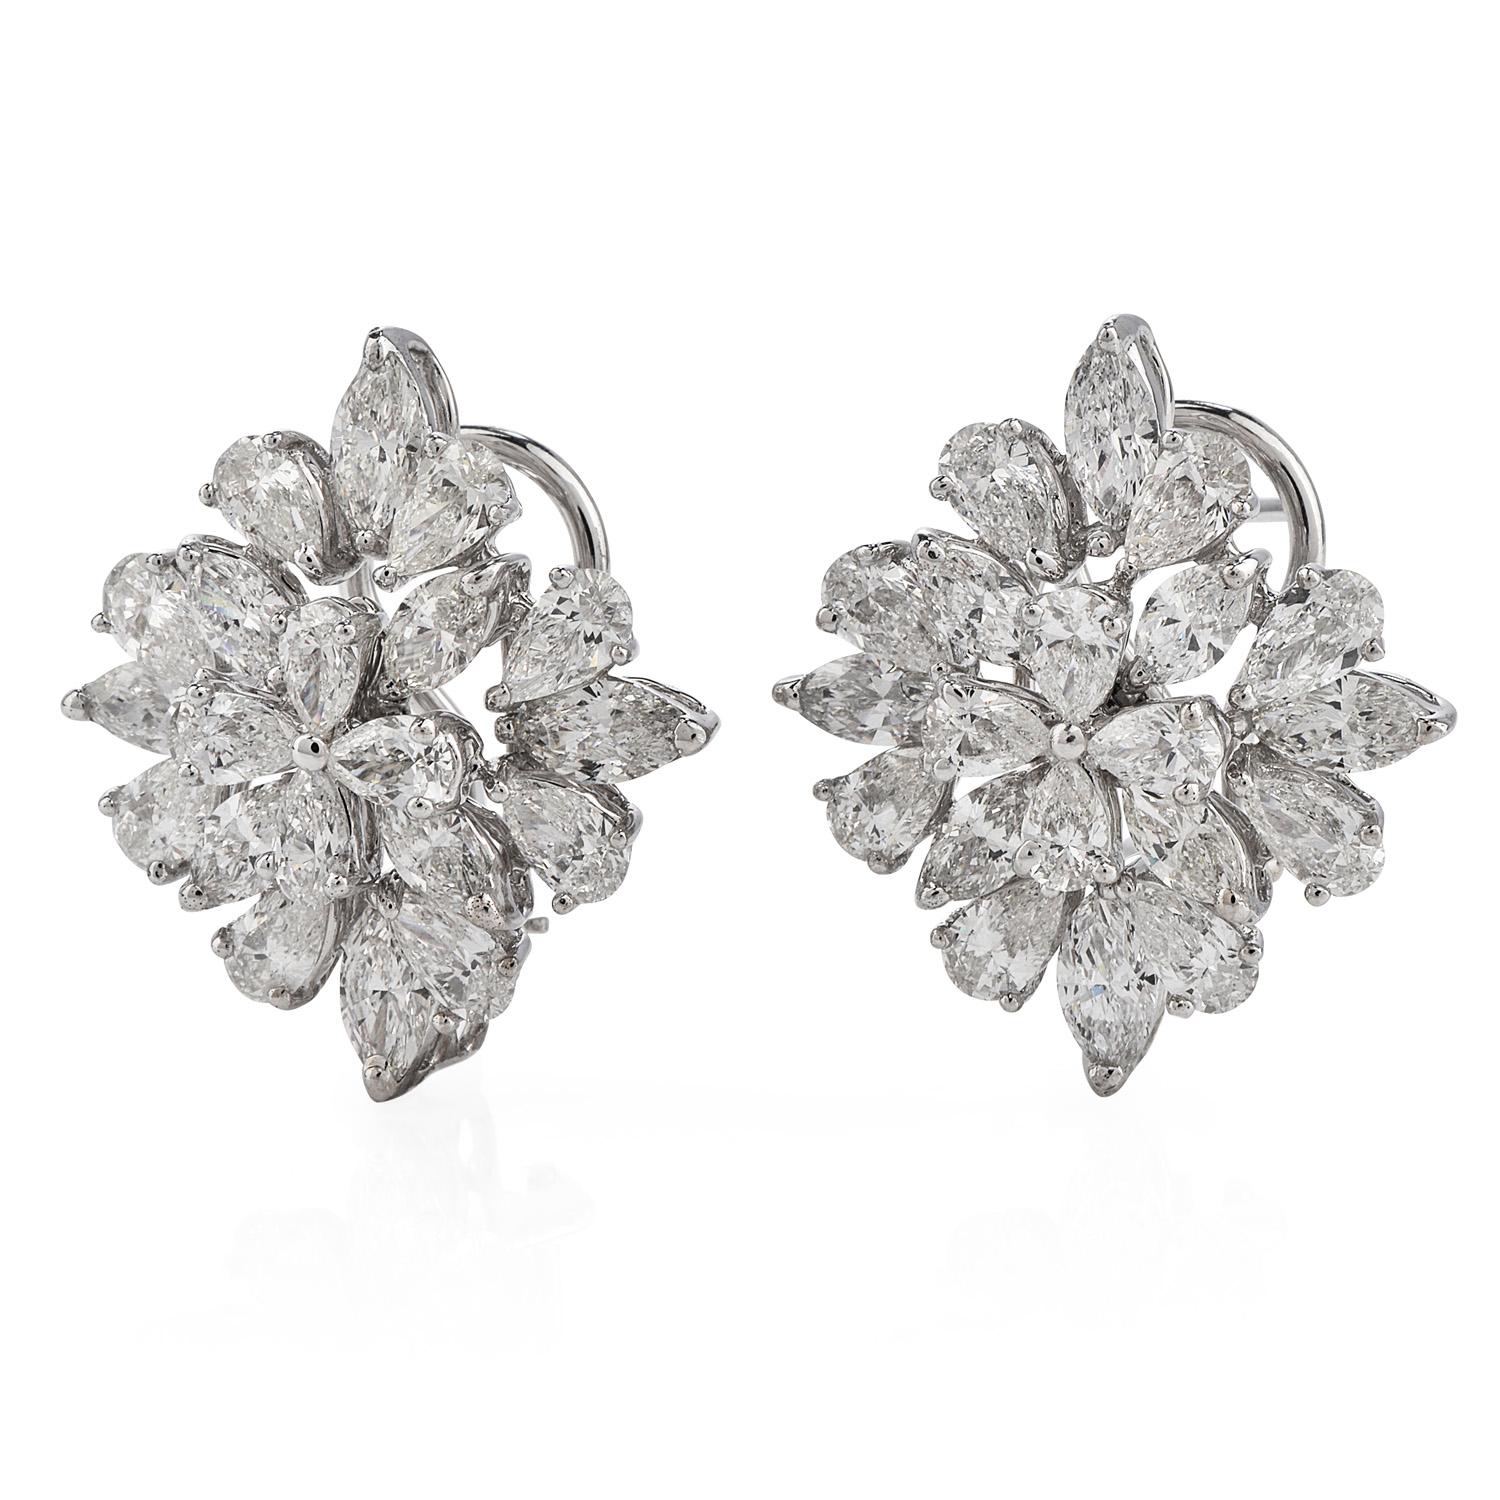 These dazzling earrings would be suited for your next formal occasion, or anytime you’d like to feel fancy and special.

These alluring earrings boast 40 genuine natural diamonds with marquise and pear shape, totaling  9.65 carats in total,